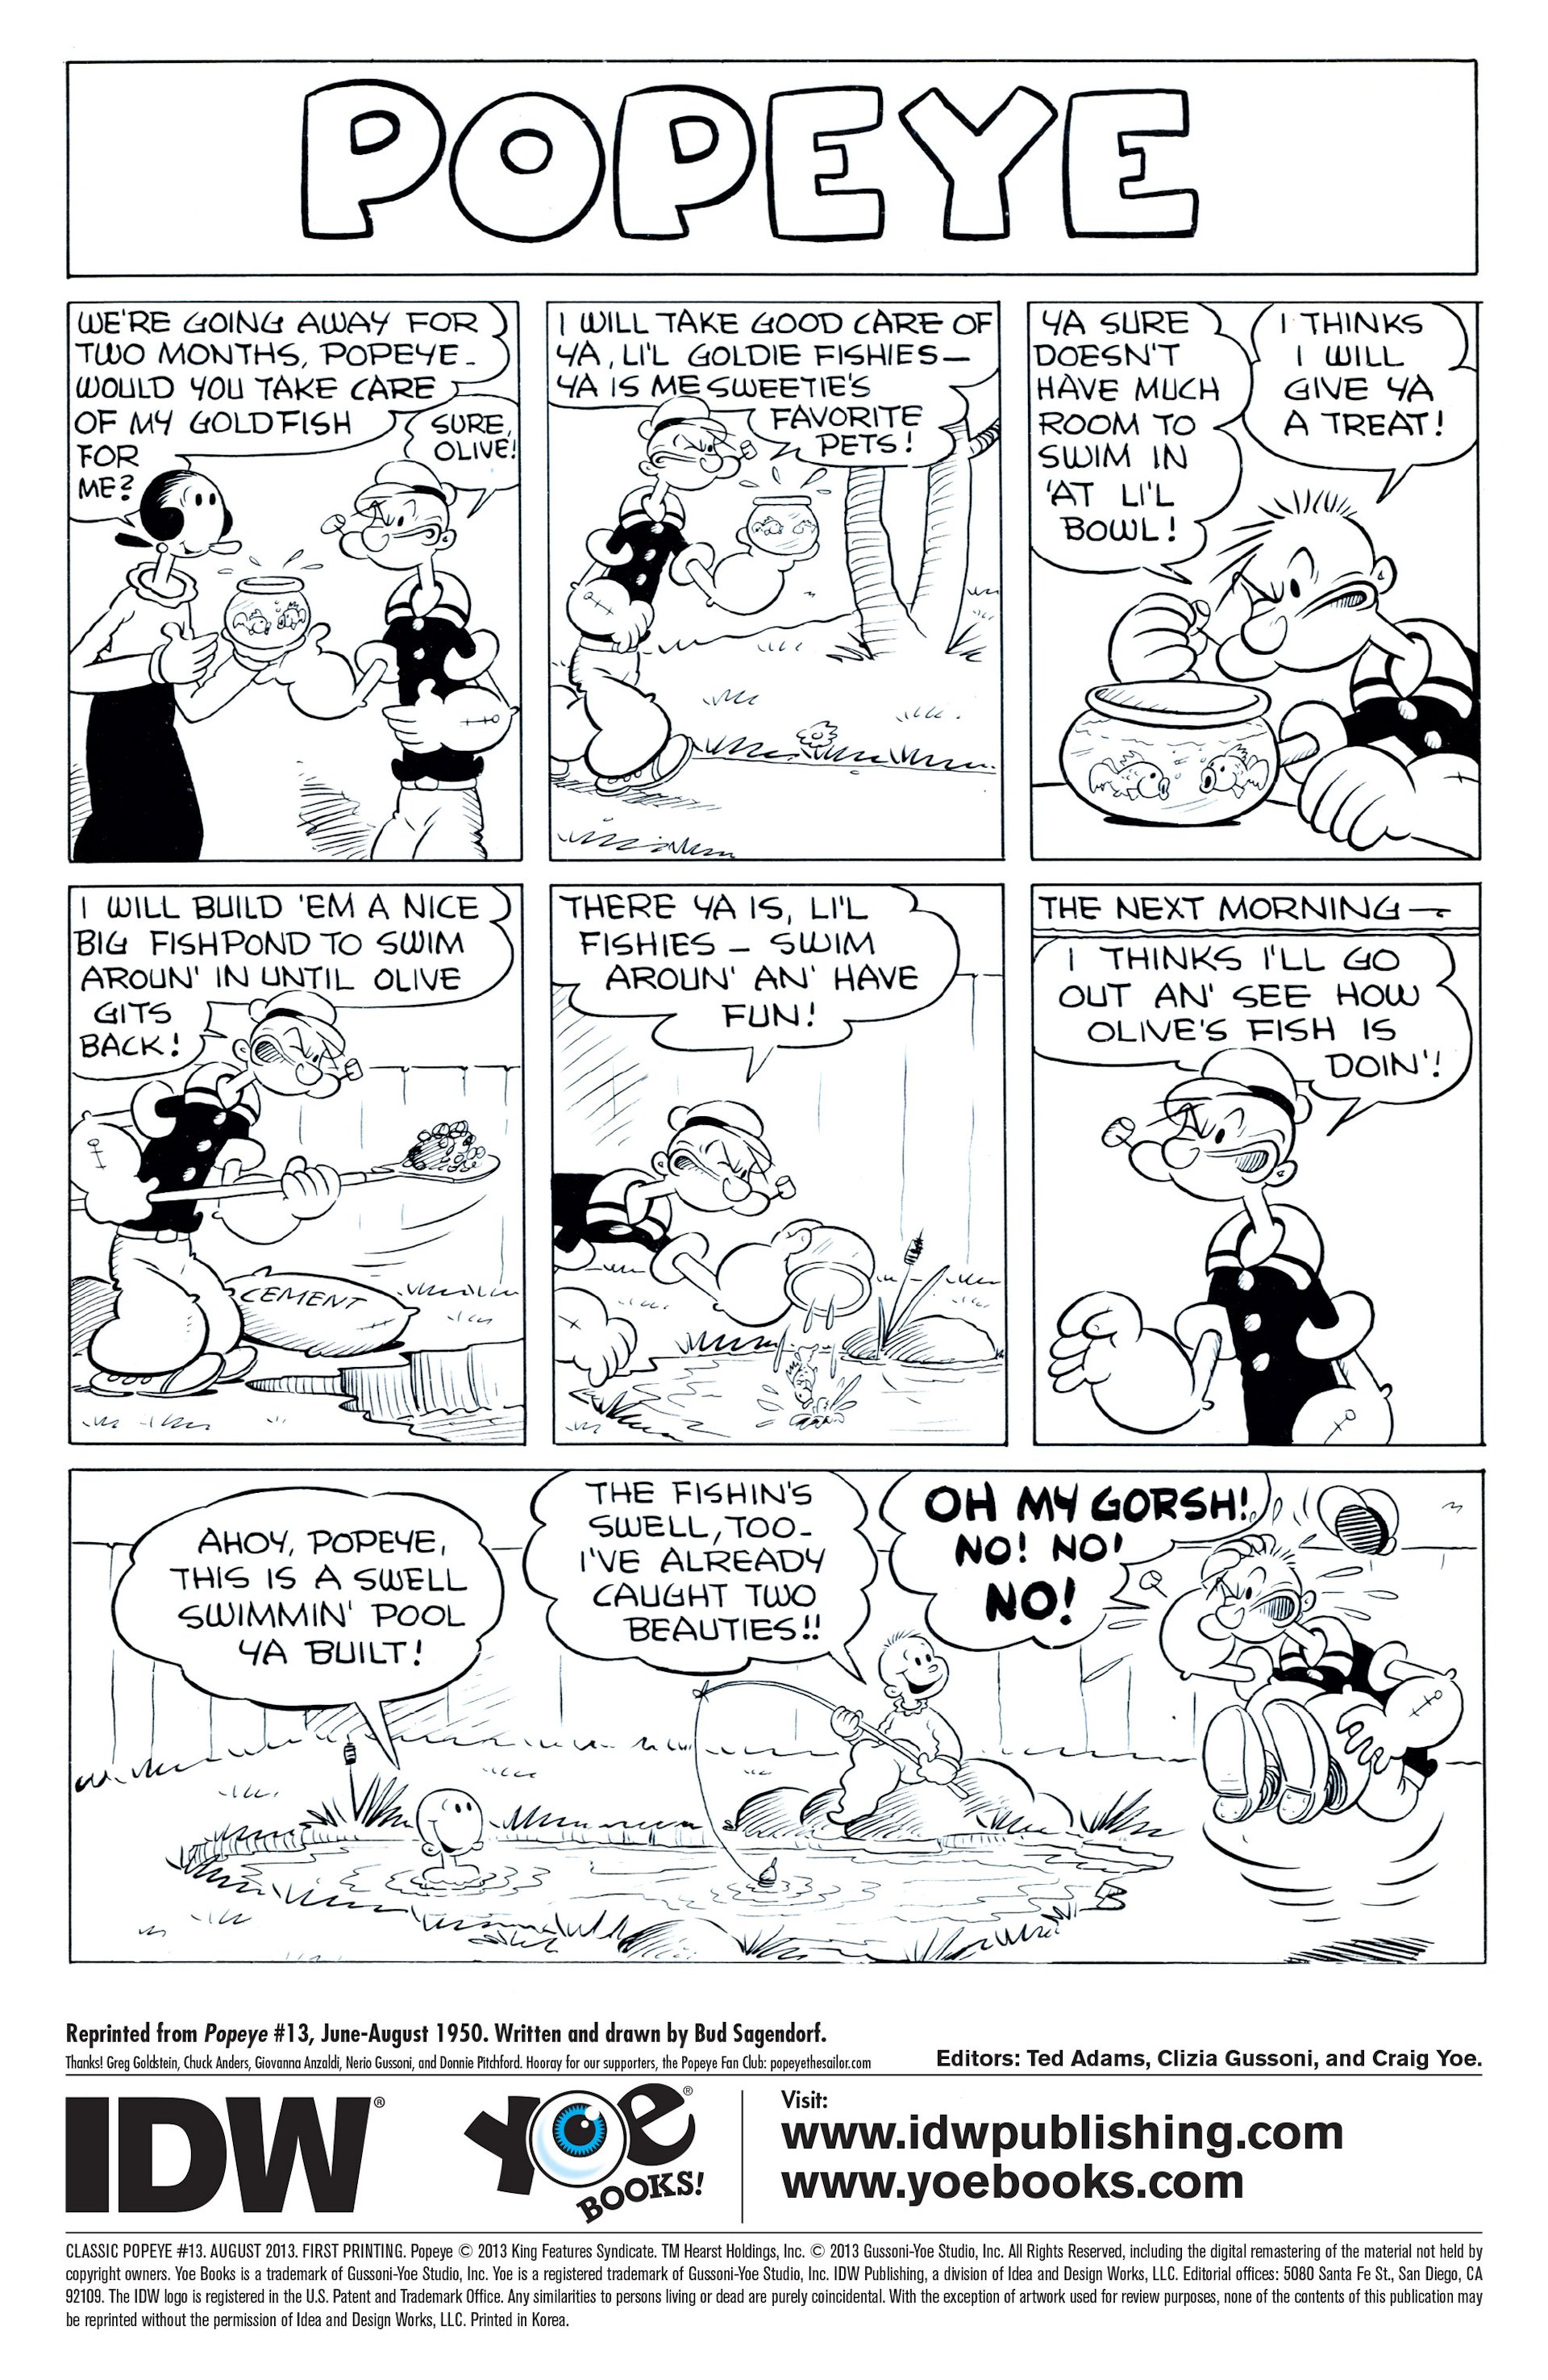 Read online Classic Popeye comic -  Issue #13 - 2